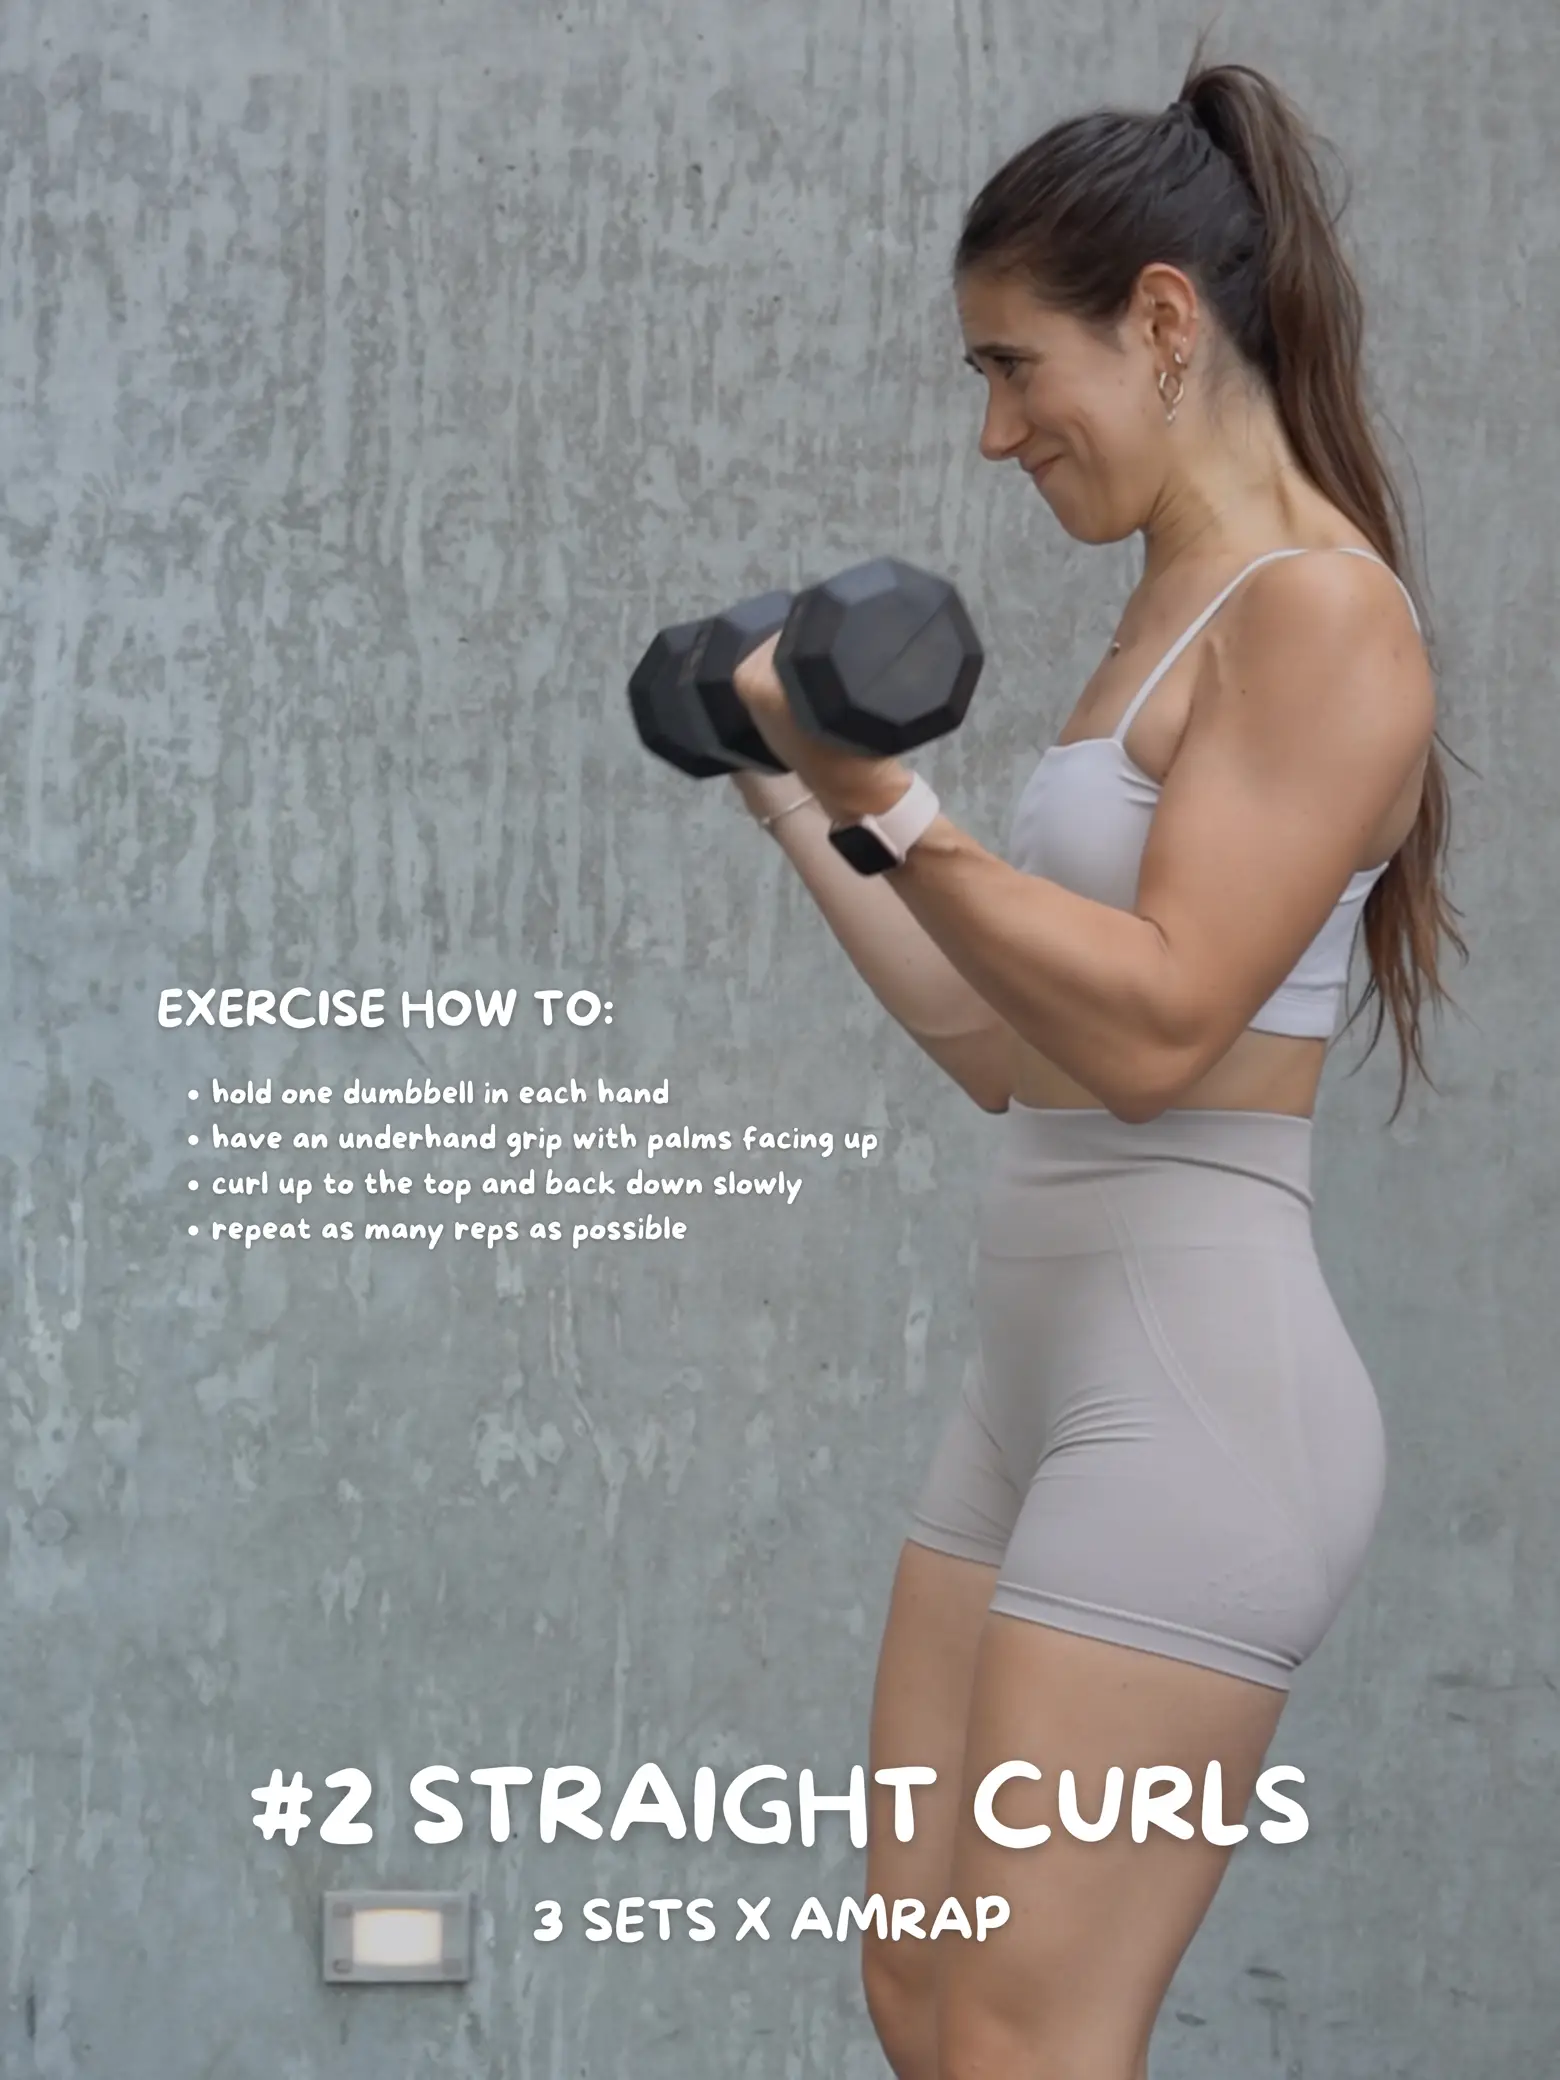 3 Exercises to Do for Toned Shoulders, Gallery posted by Gianna Cestone